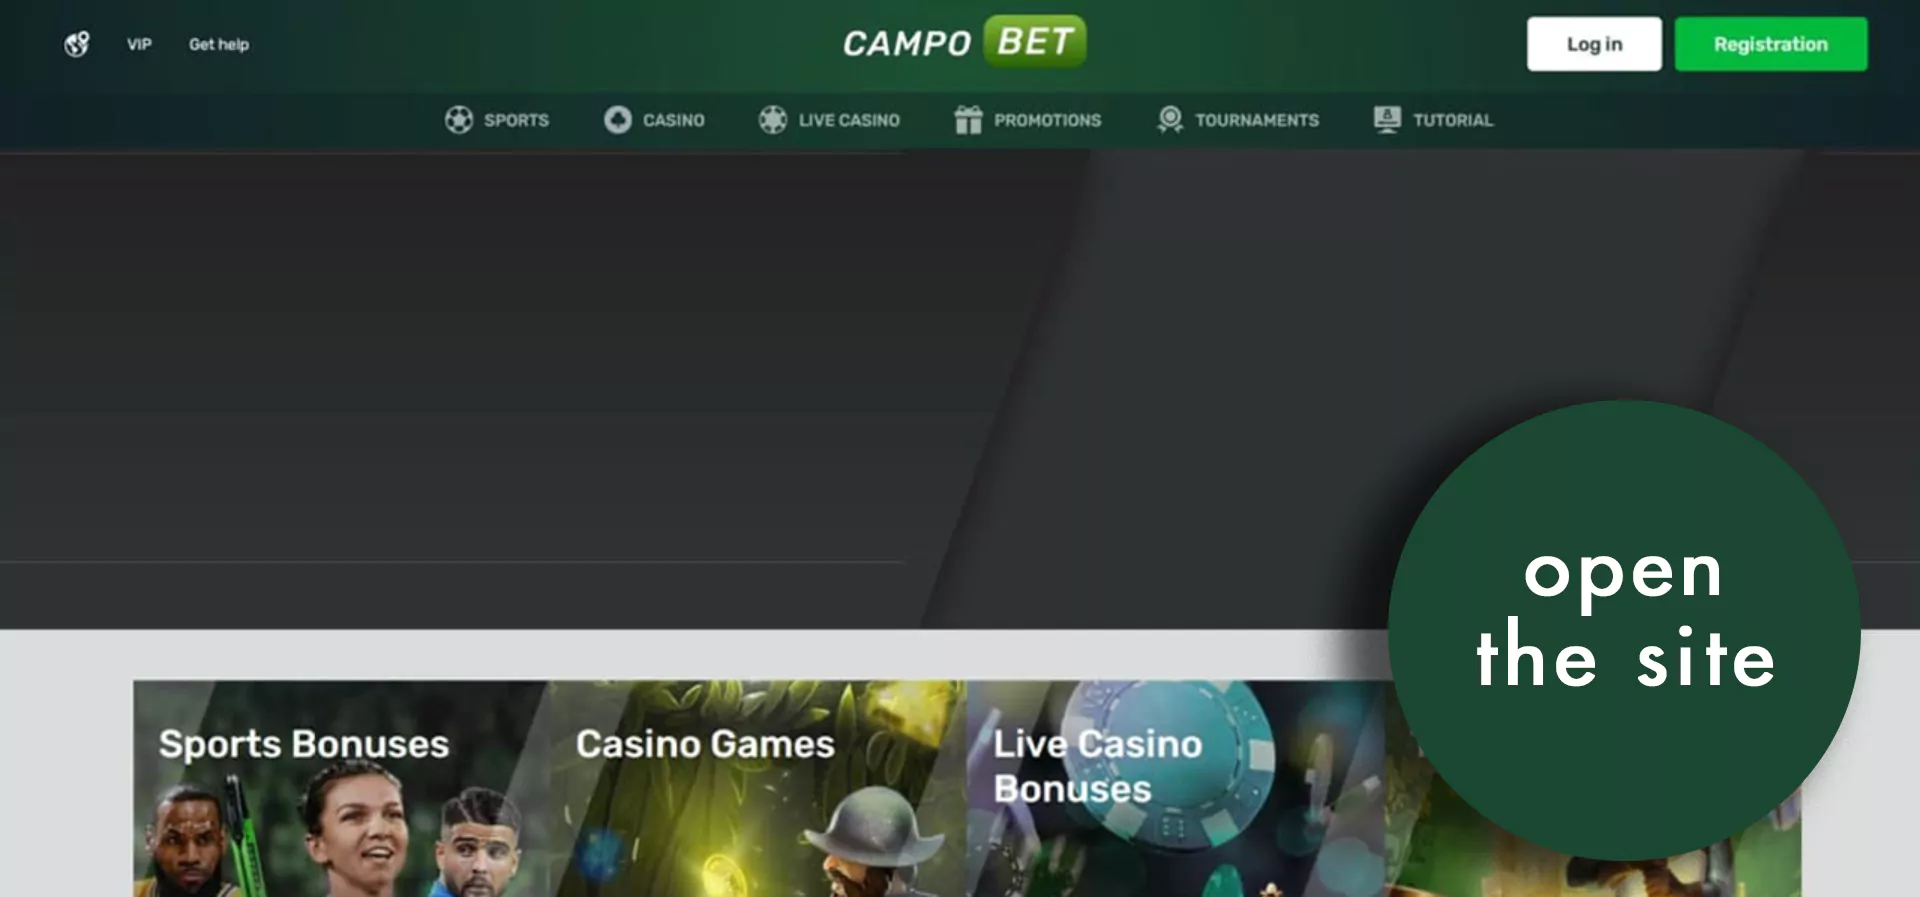 Open the official site of Campobet in a browser.